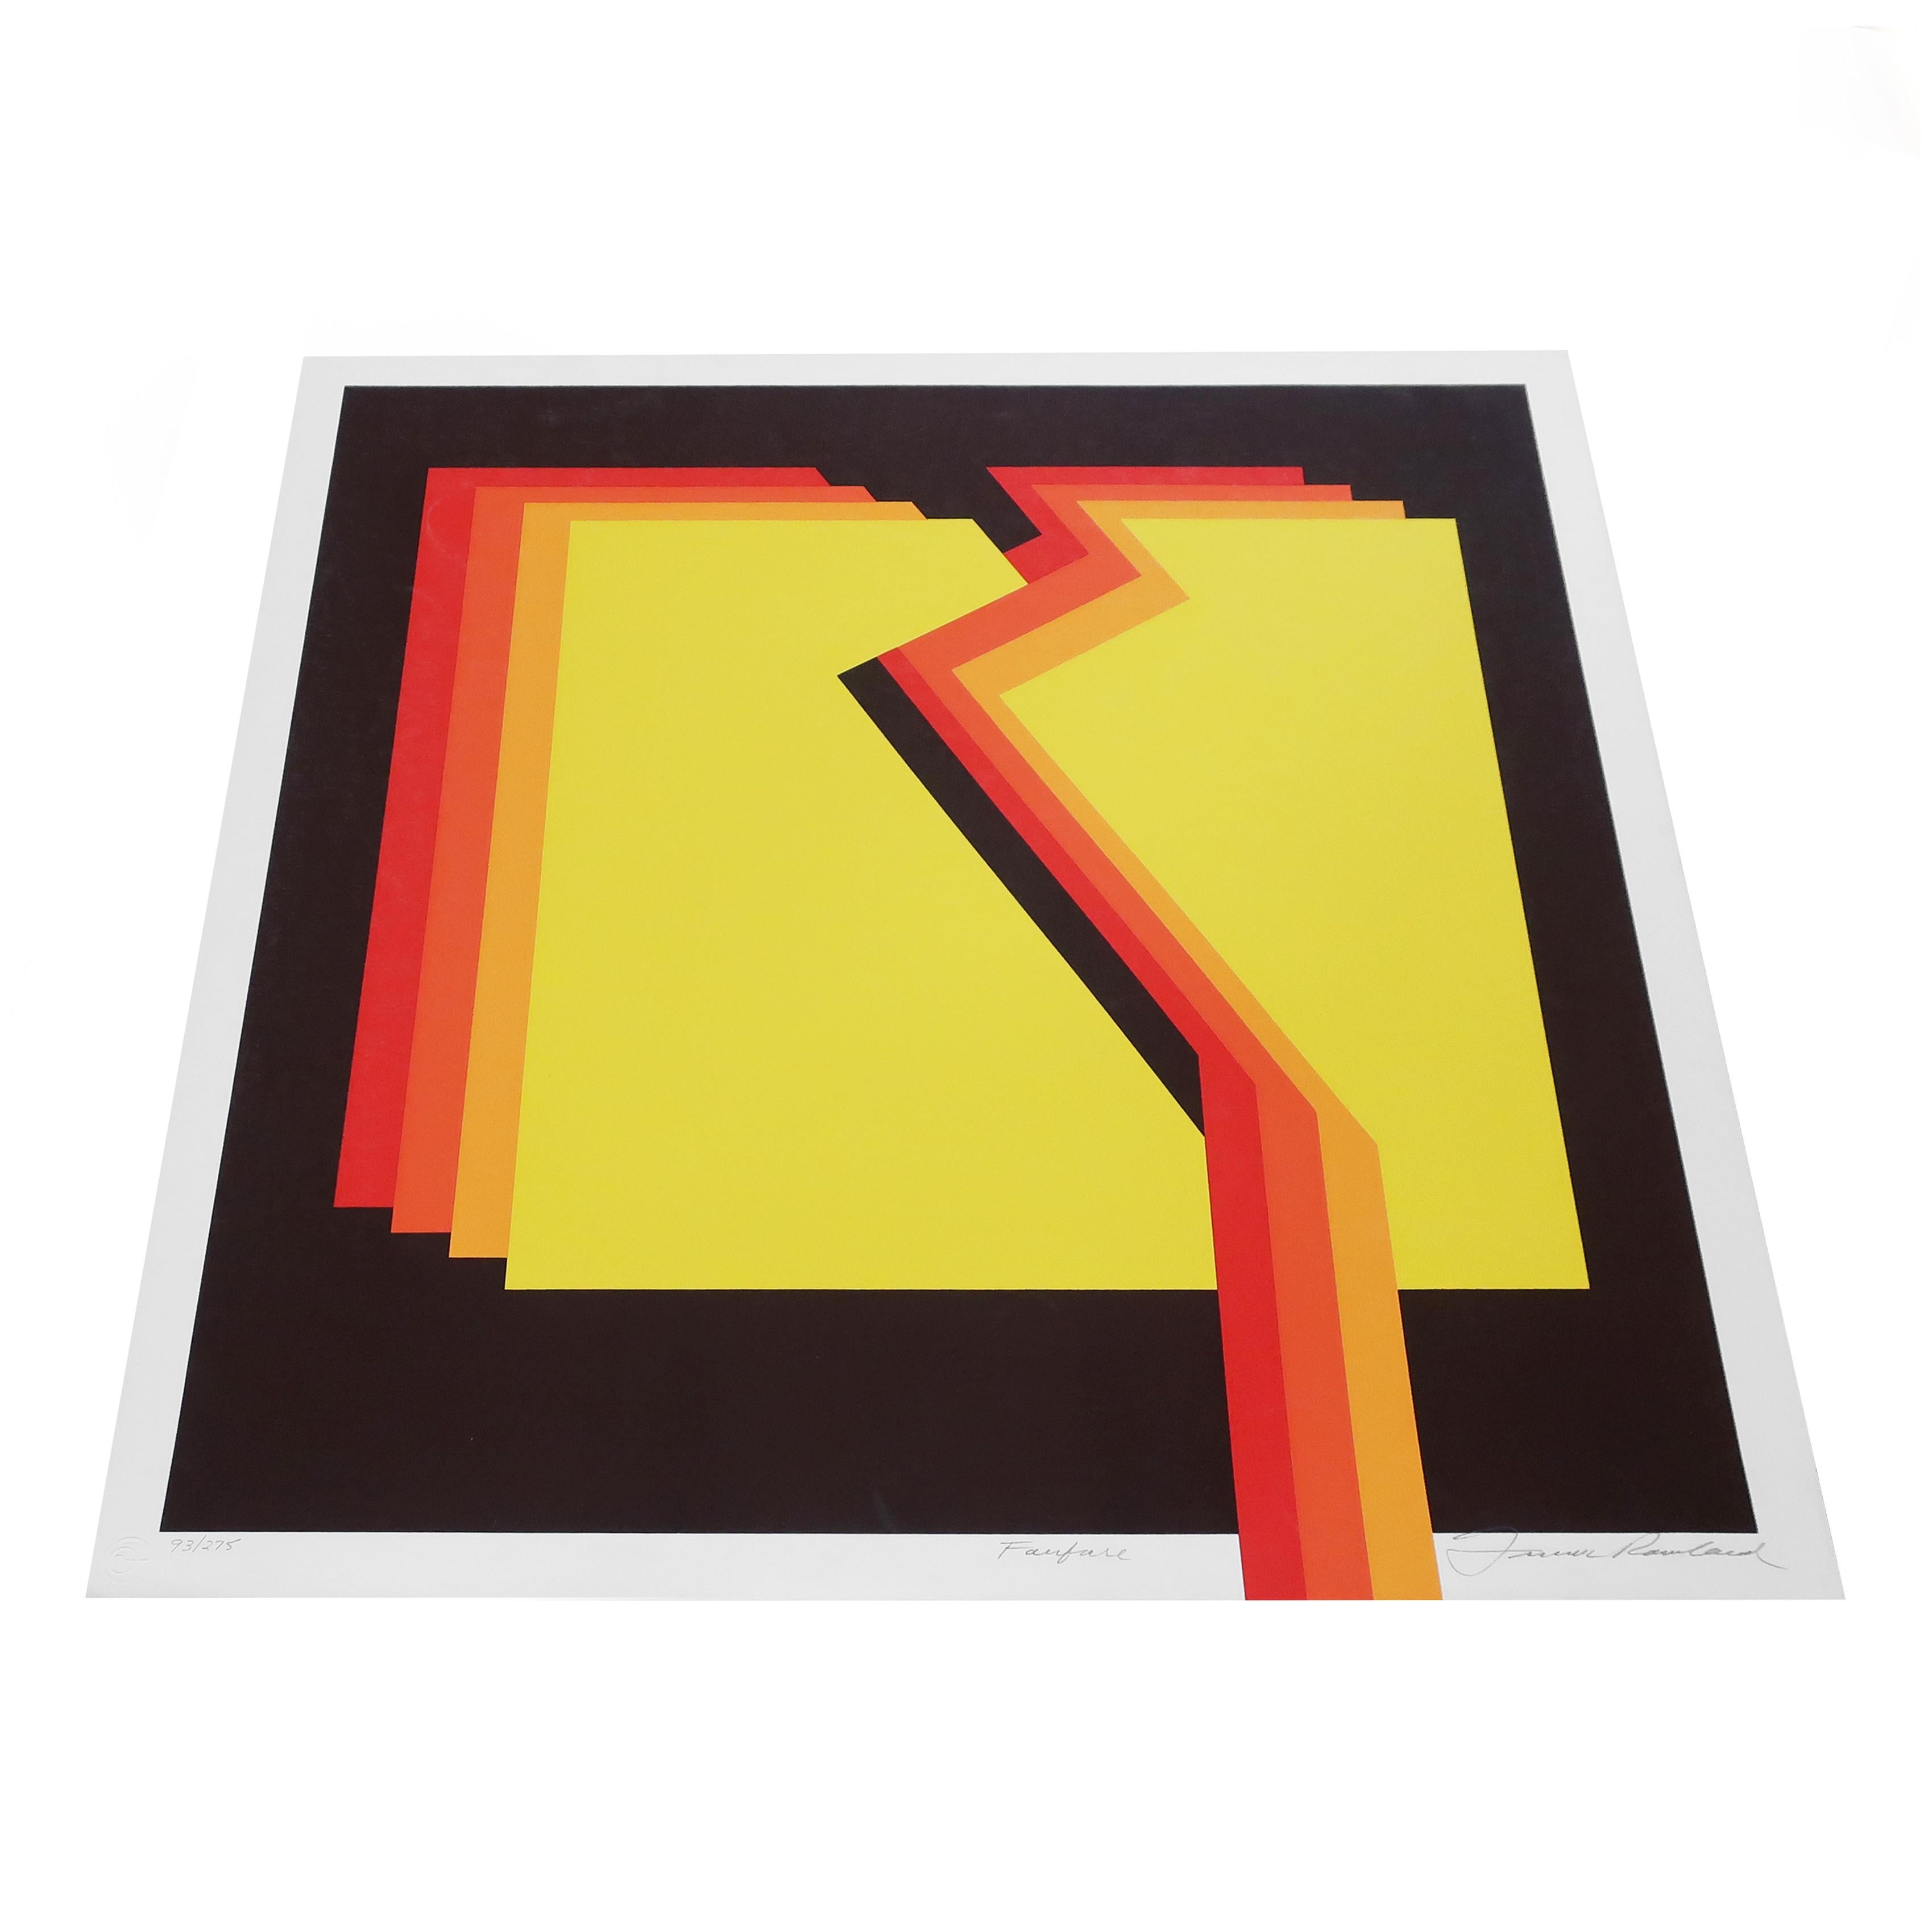 A striking limited edition op art serigraph by American artist Frank Rowland (1927-2012) in the hard edge style. An abstract geometric composition in red, orange, and yellow against a dark brown background. Pencil signed 